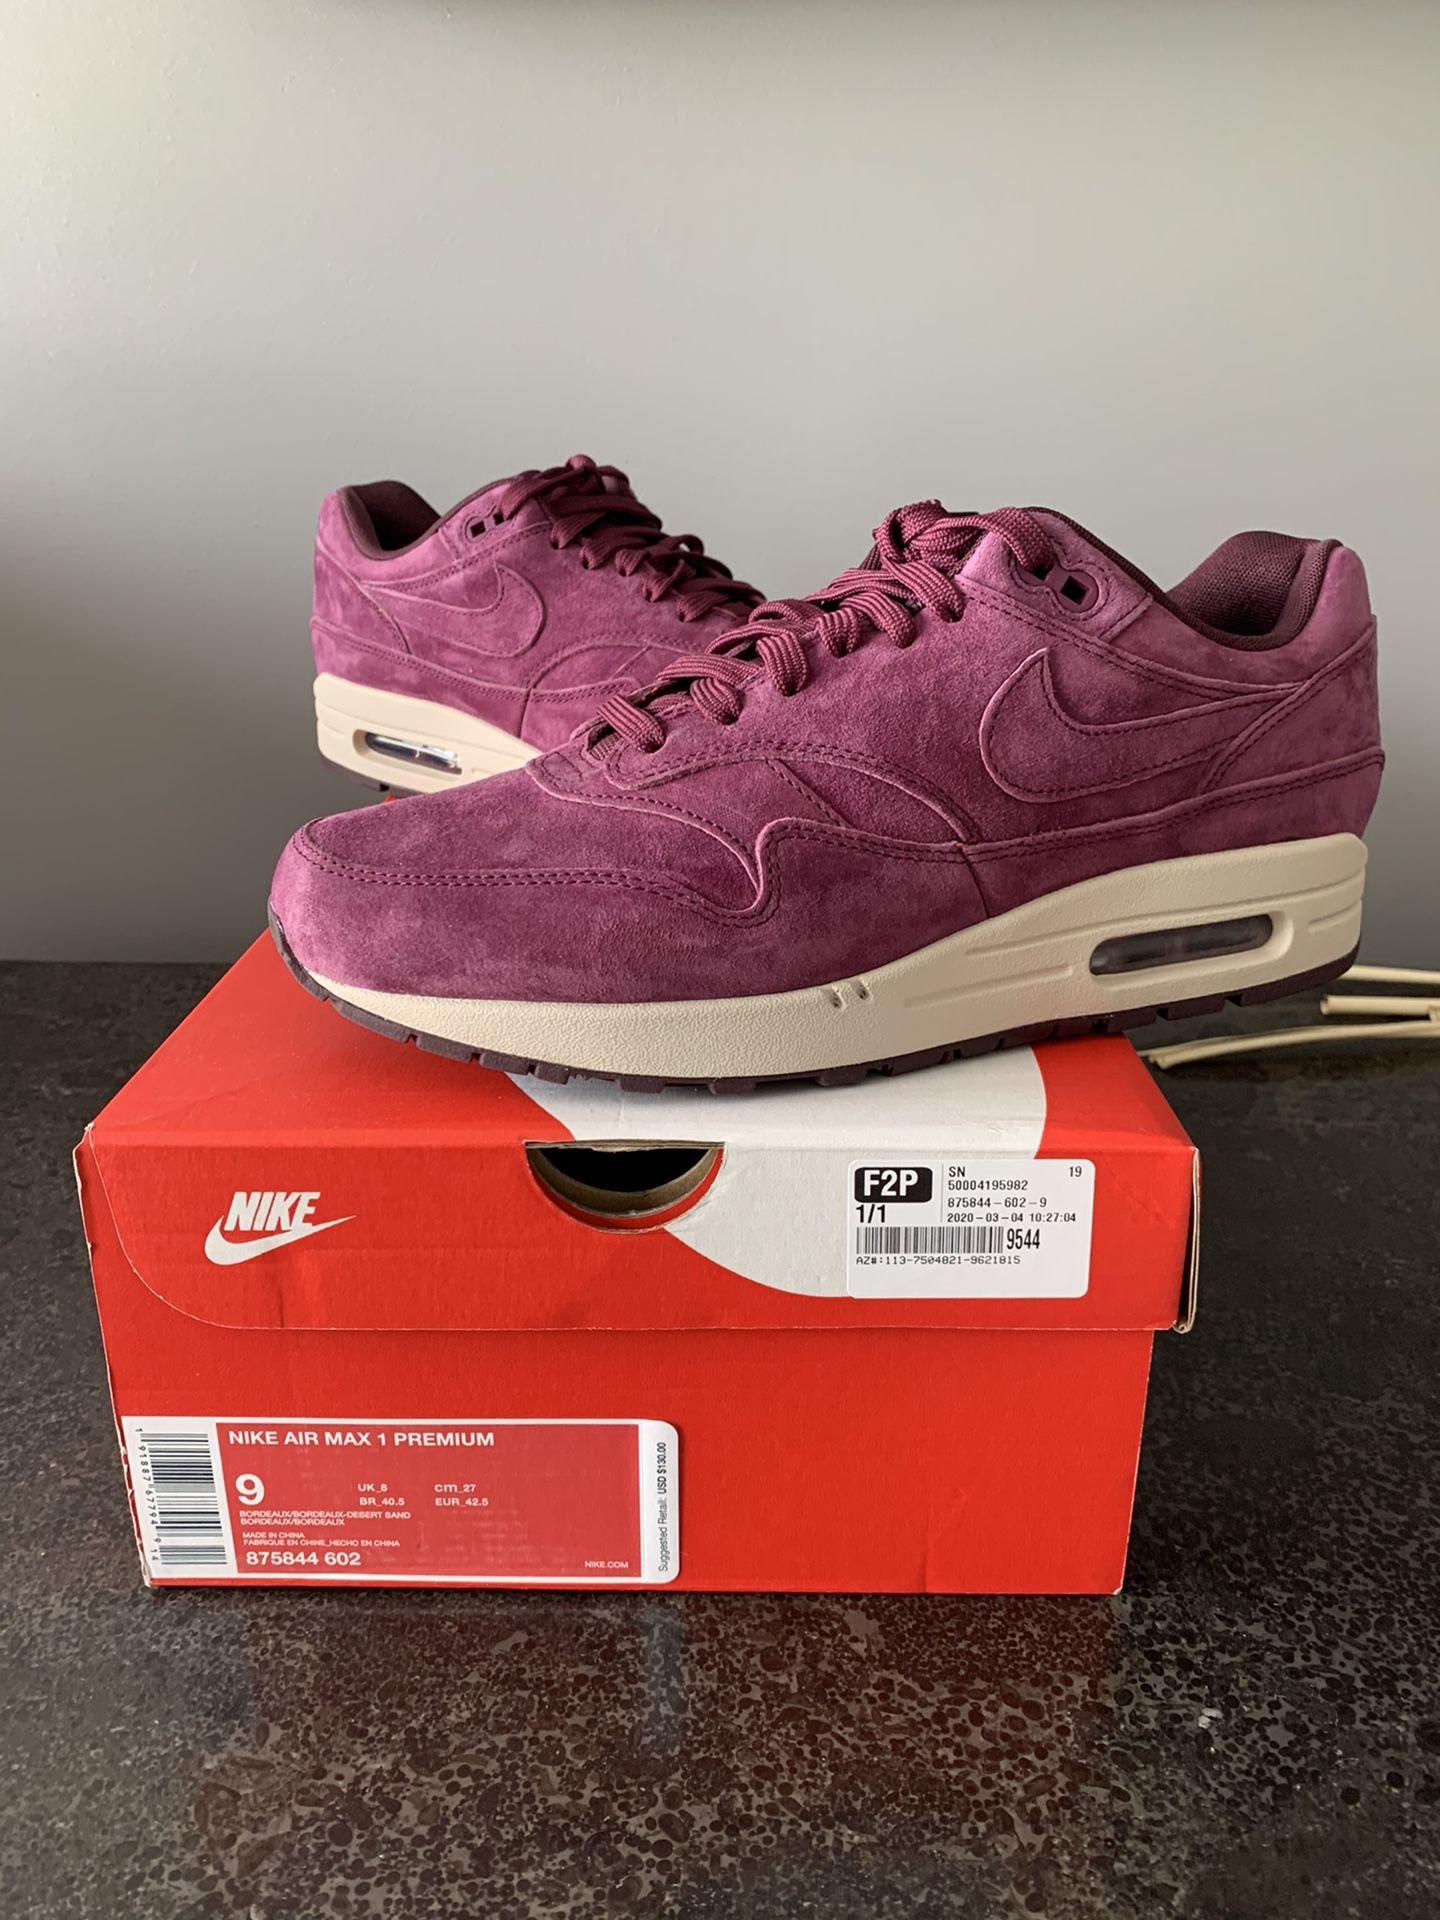 BRAND NEW! Nike Air Max 1 BordeauxSize 9